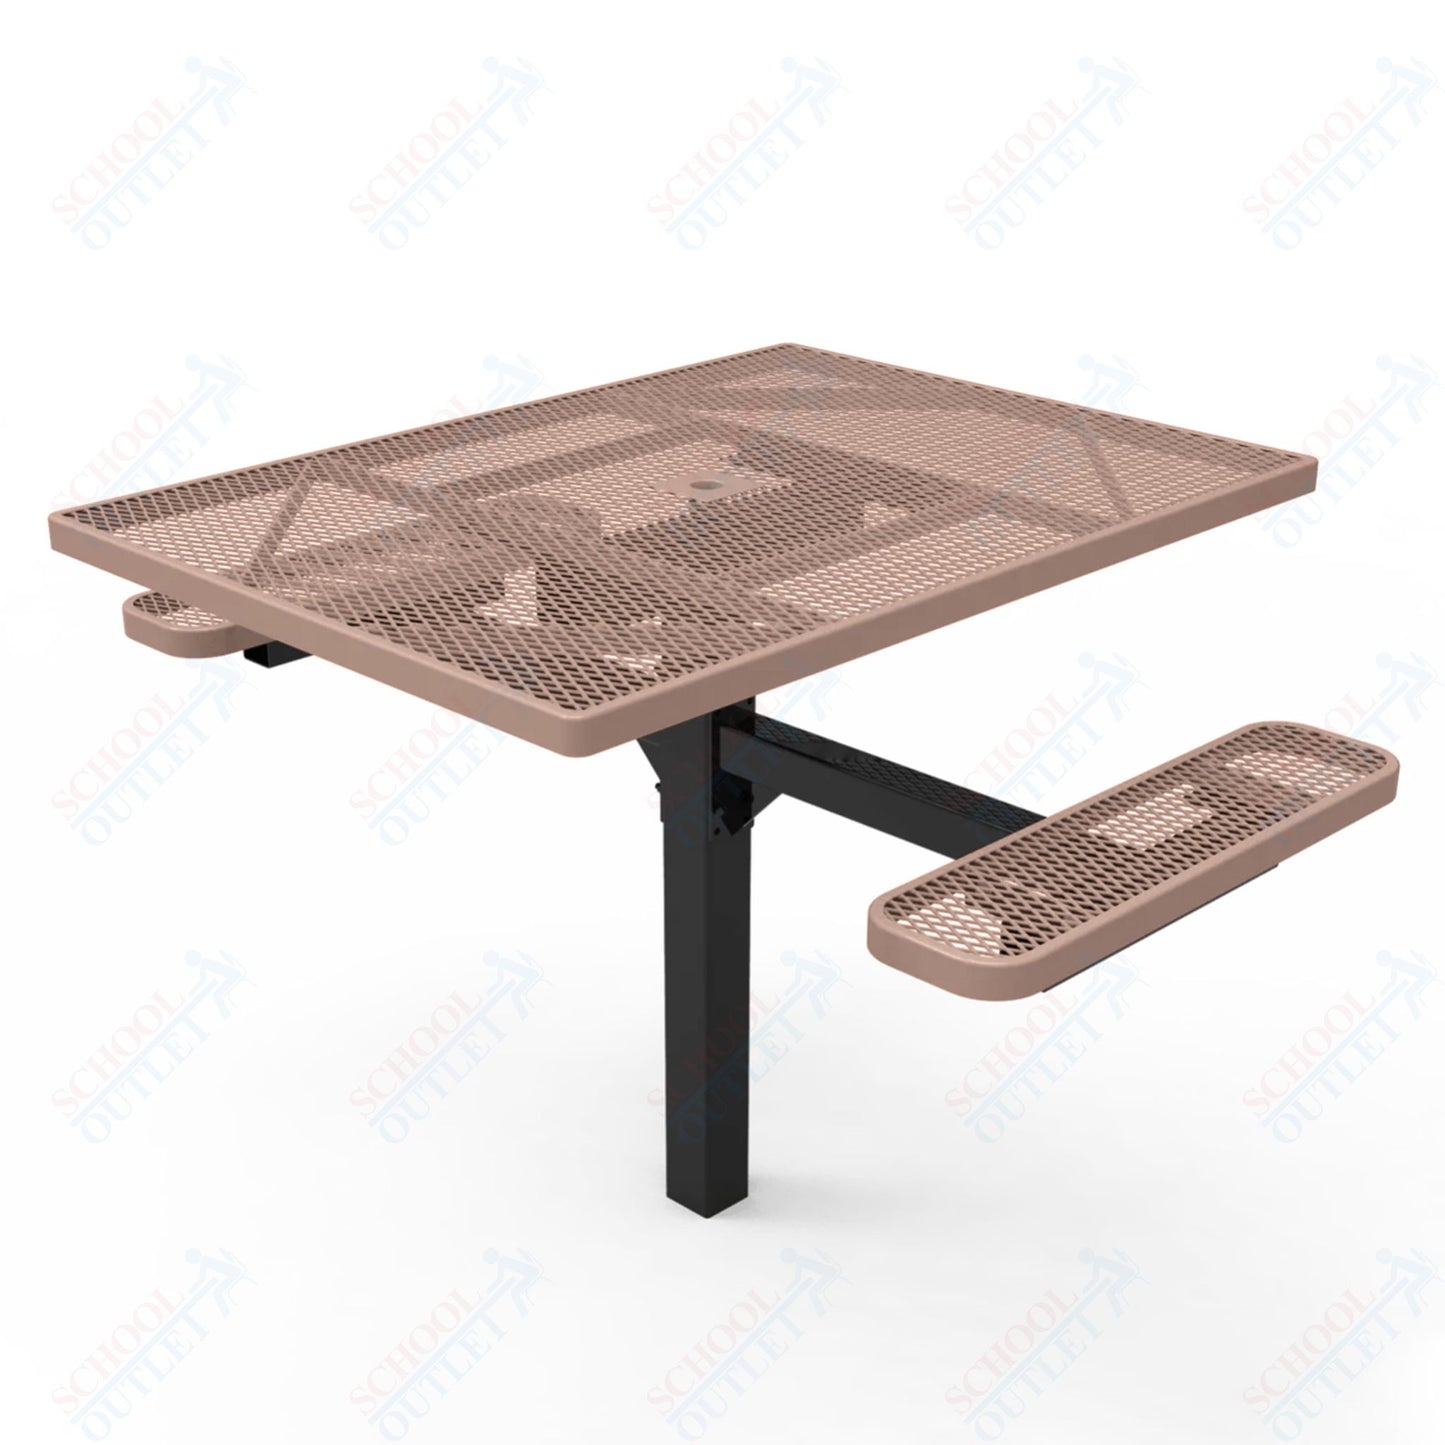 MyTcoat MYT-TSQ46-16-012 46″ Square Pedestal Picnic Table with Inground Mount, 2 Seat and Alternate ADA Accessible (77"W x 63"D x 30"H)